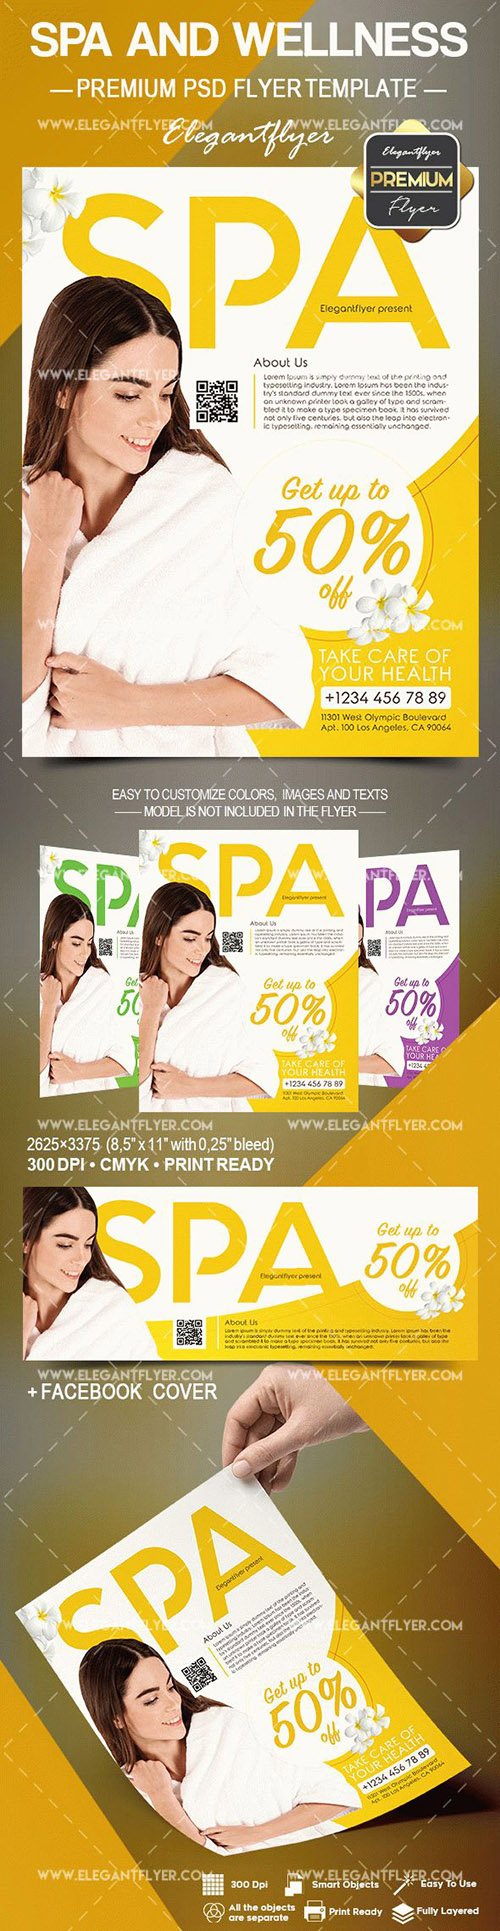 Spa and Wellness - Flyer PSD Template